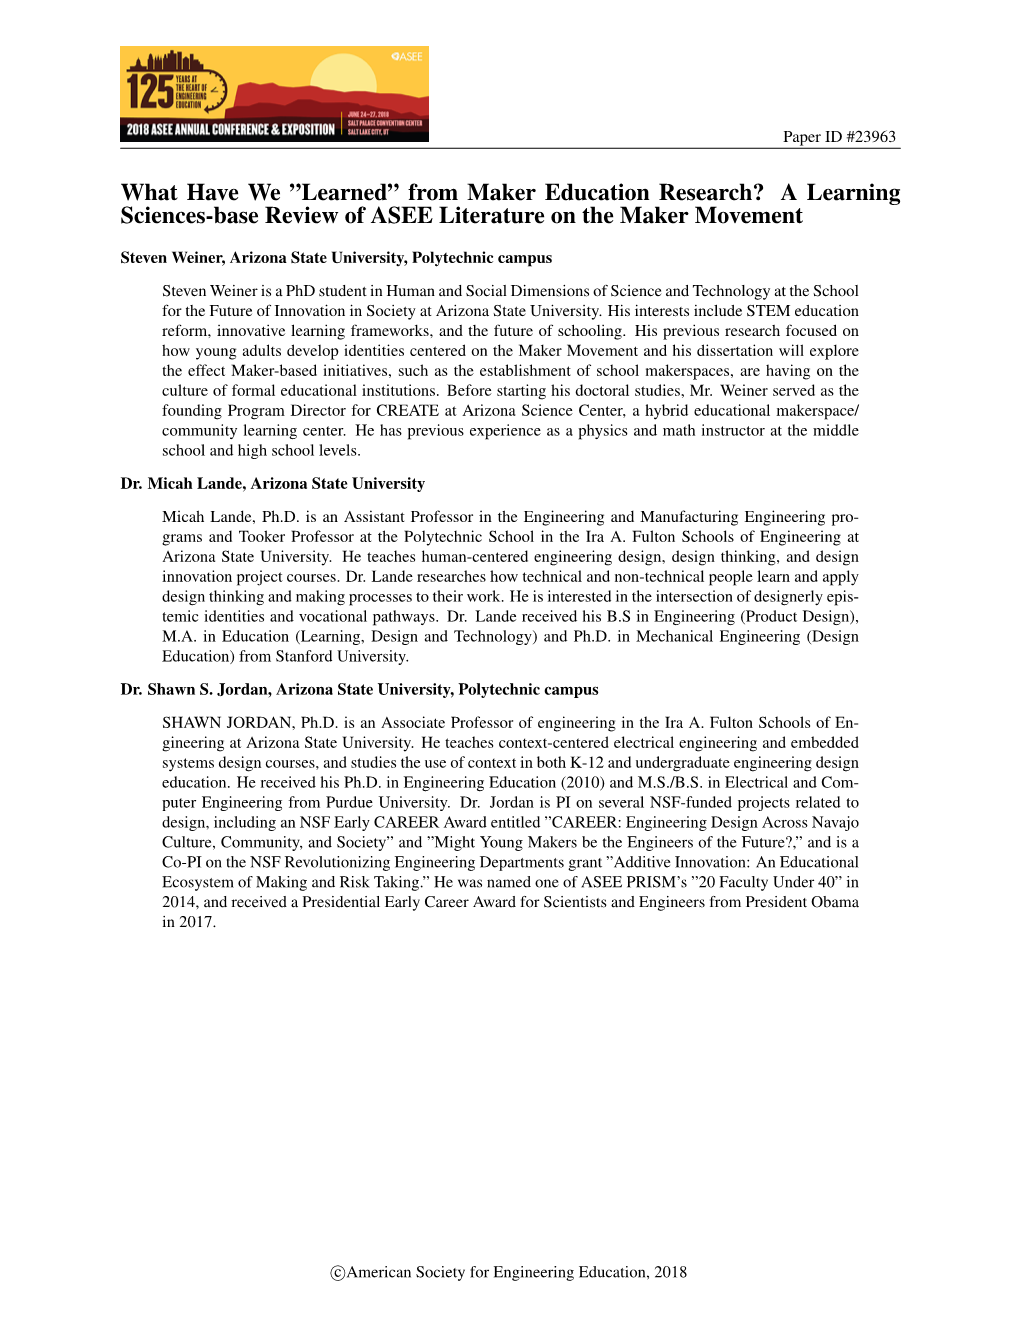 From Maker Education Research? a Learning Sciences-Base Review of ASEE Literature on the Maker Movement